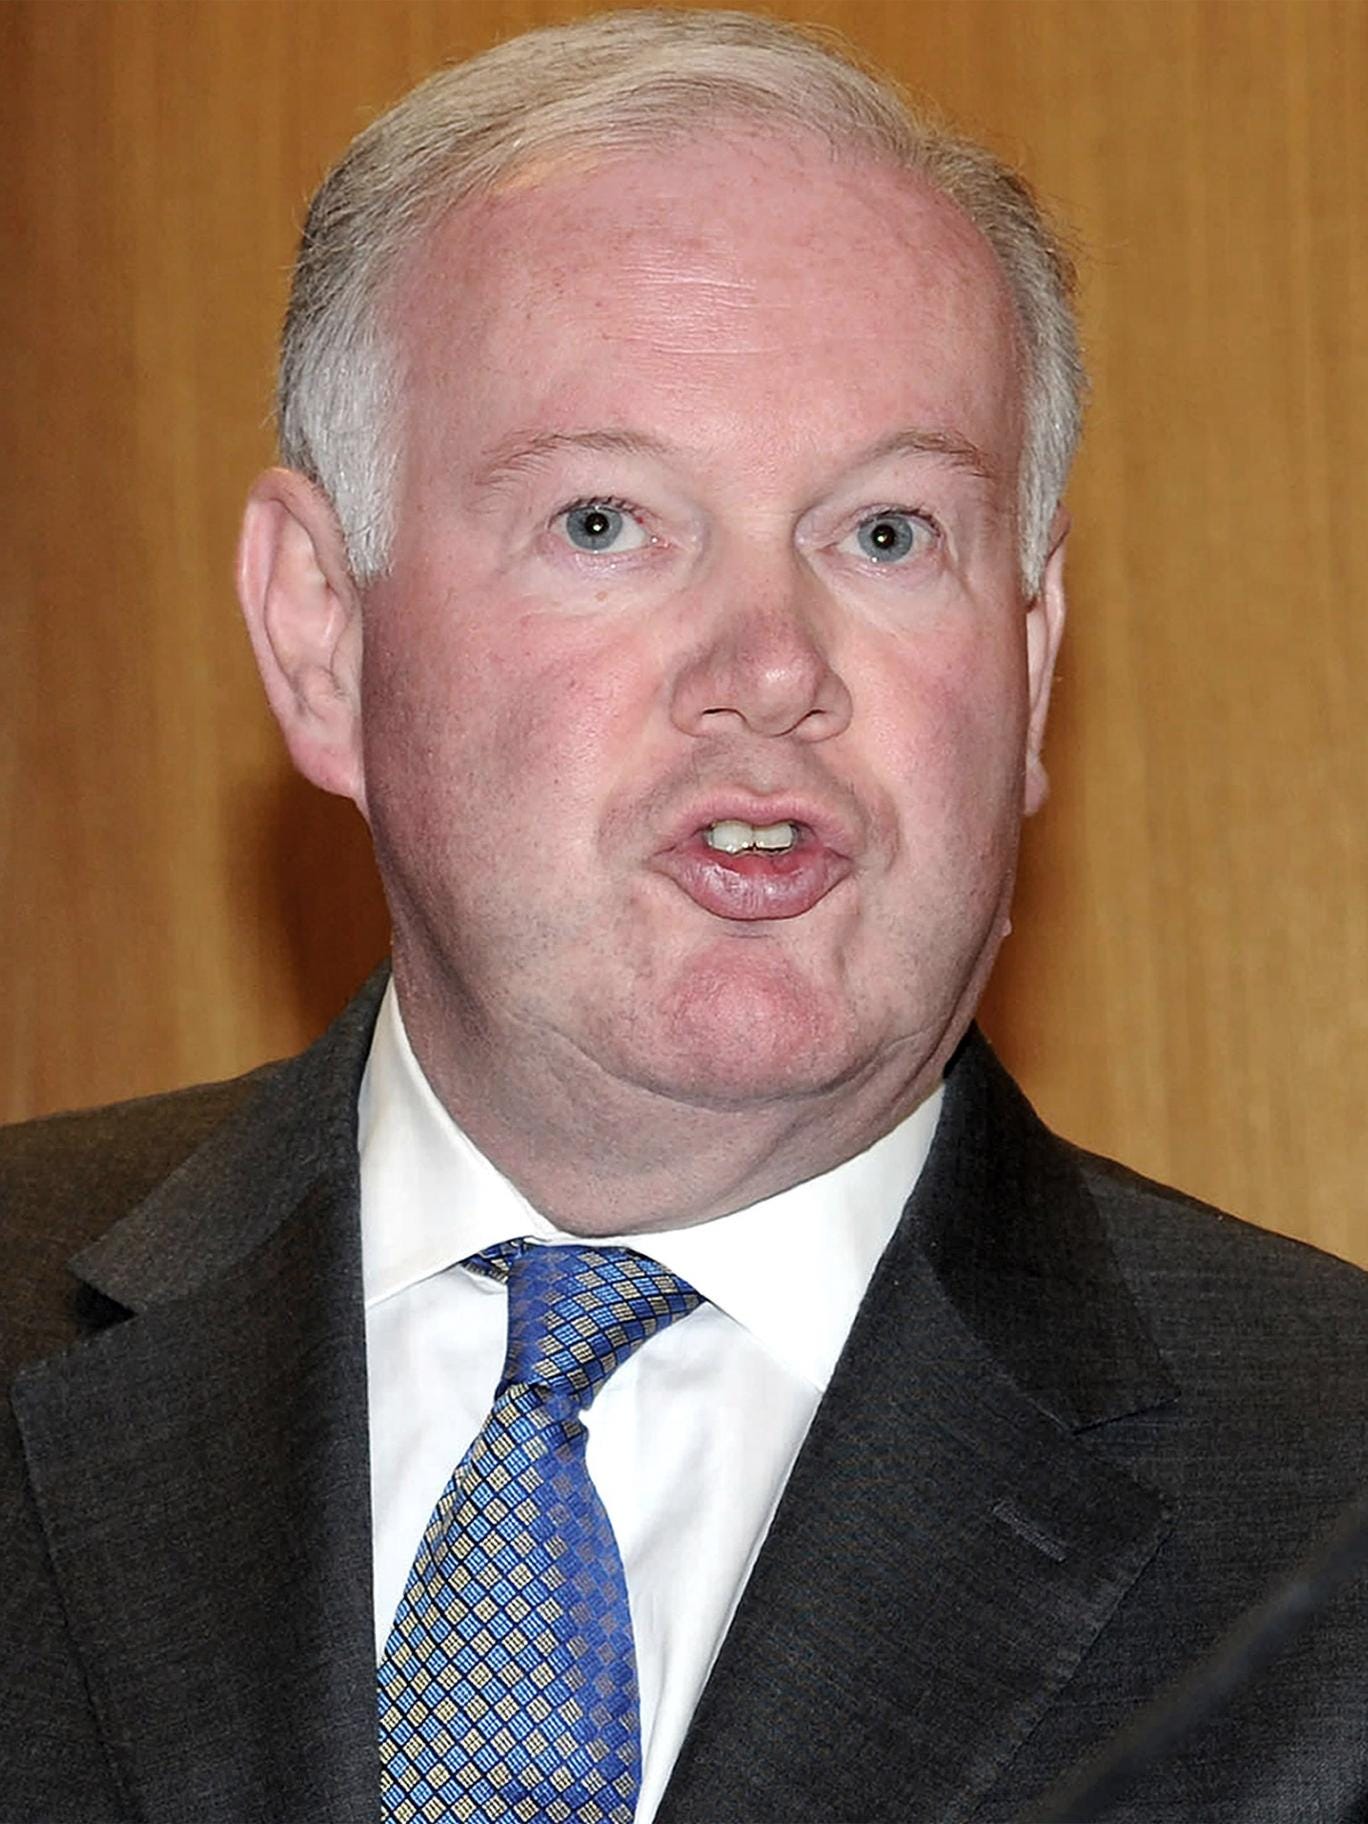 Charles Hendry, MP for Wealdon, will be paid £60k a year for one - pg-16-hendry-getty